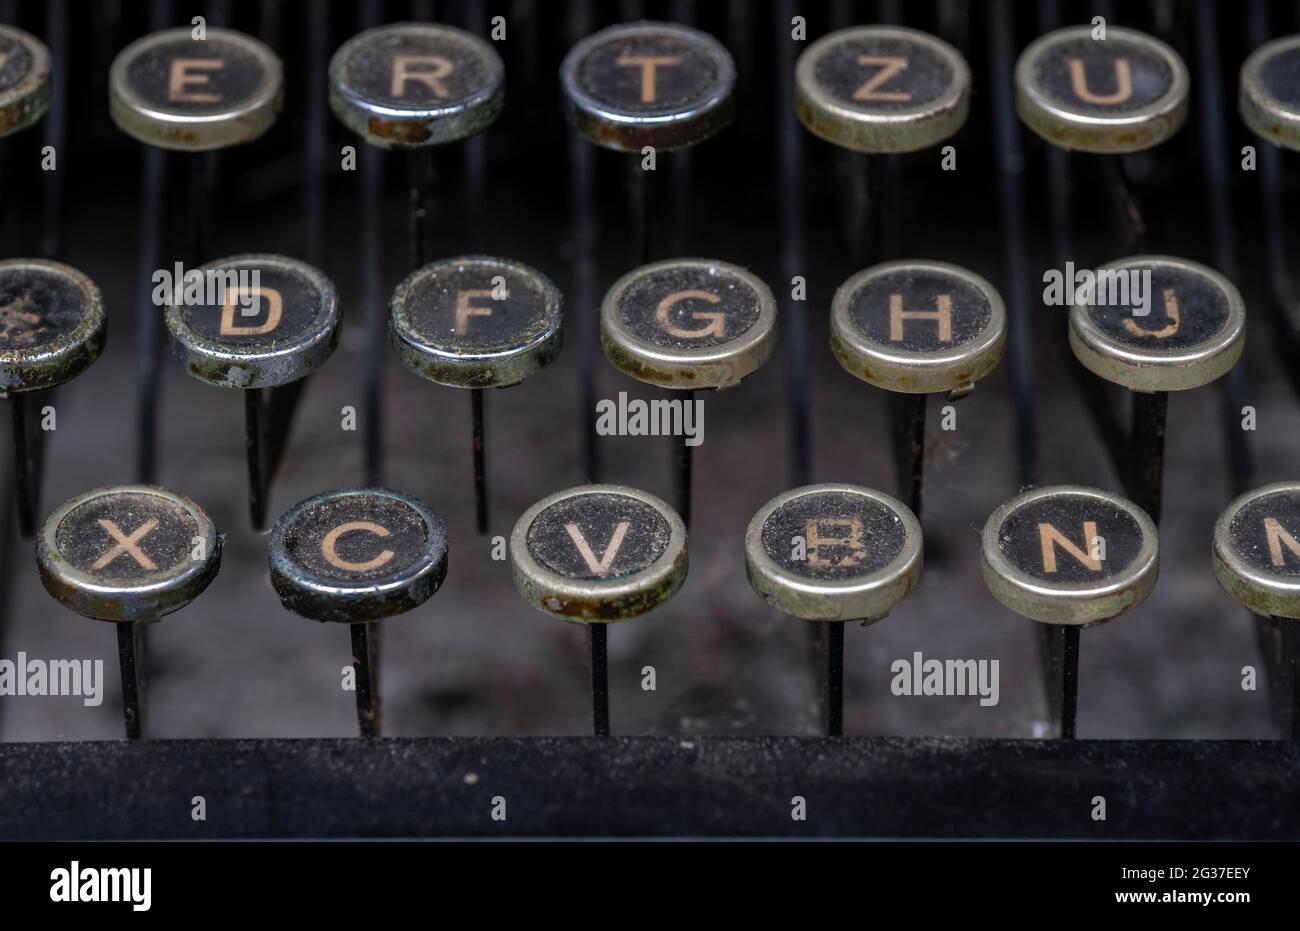 Keyboard of an old typewriter, letters, Bavaria, Germany Stock Photo